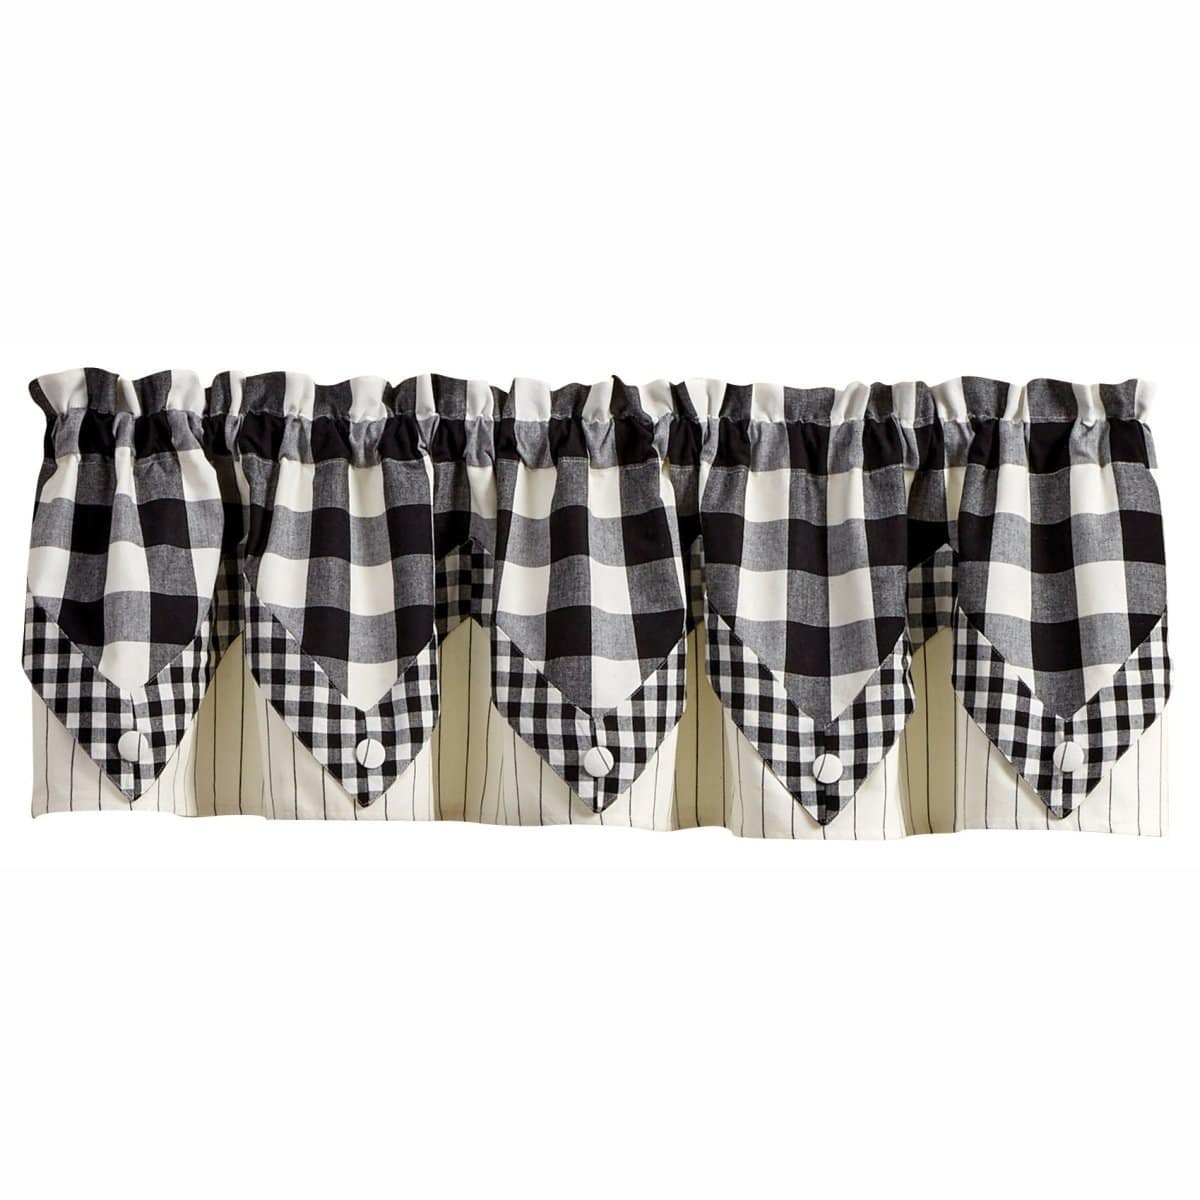 Wicklow Check in Black & Cream Point Valance Lined-Park Designs-The Village Merchant